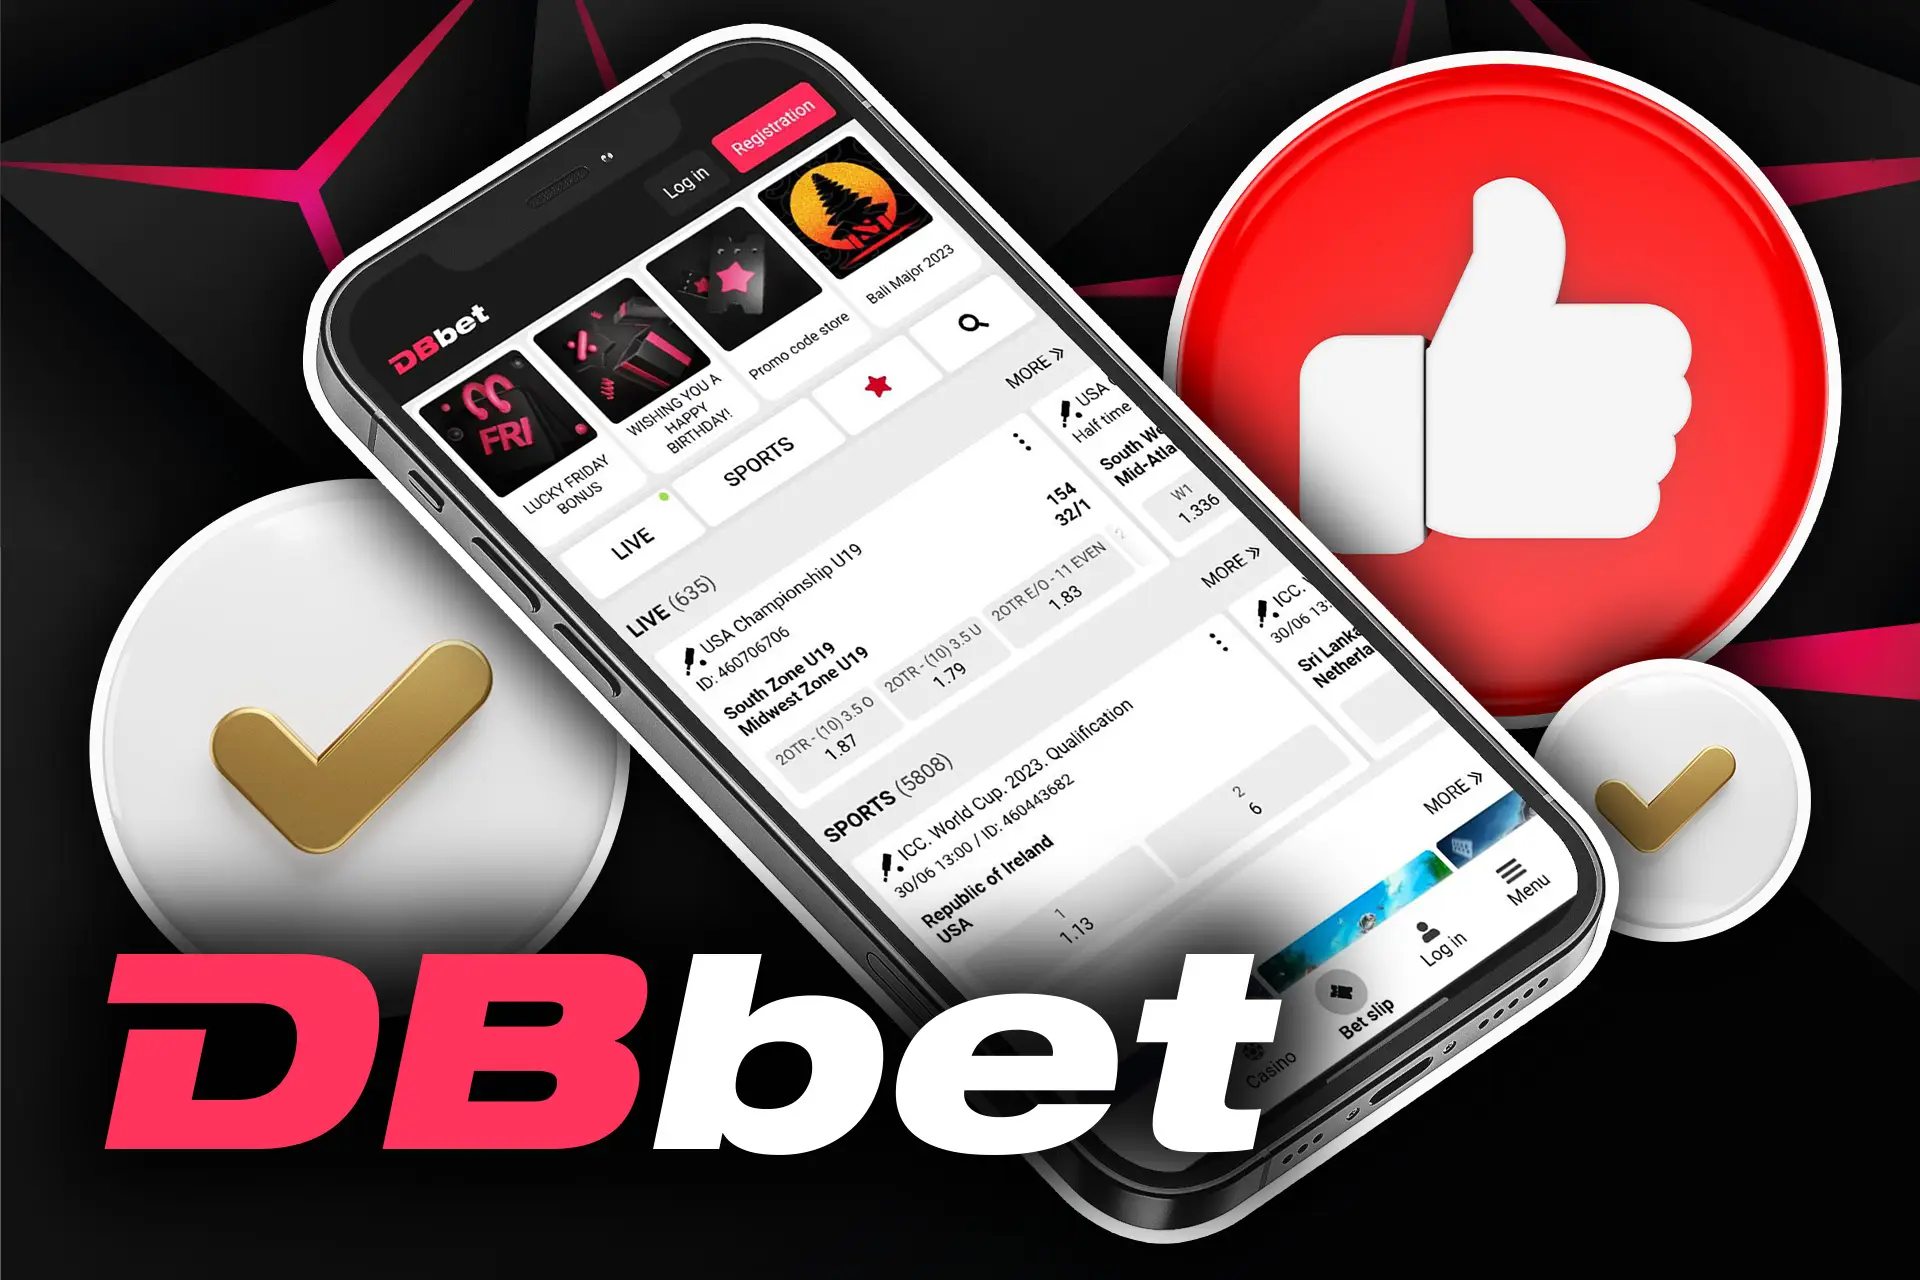 With the DBbet app you can play and bet anywhere.